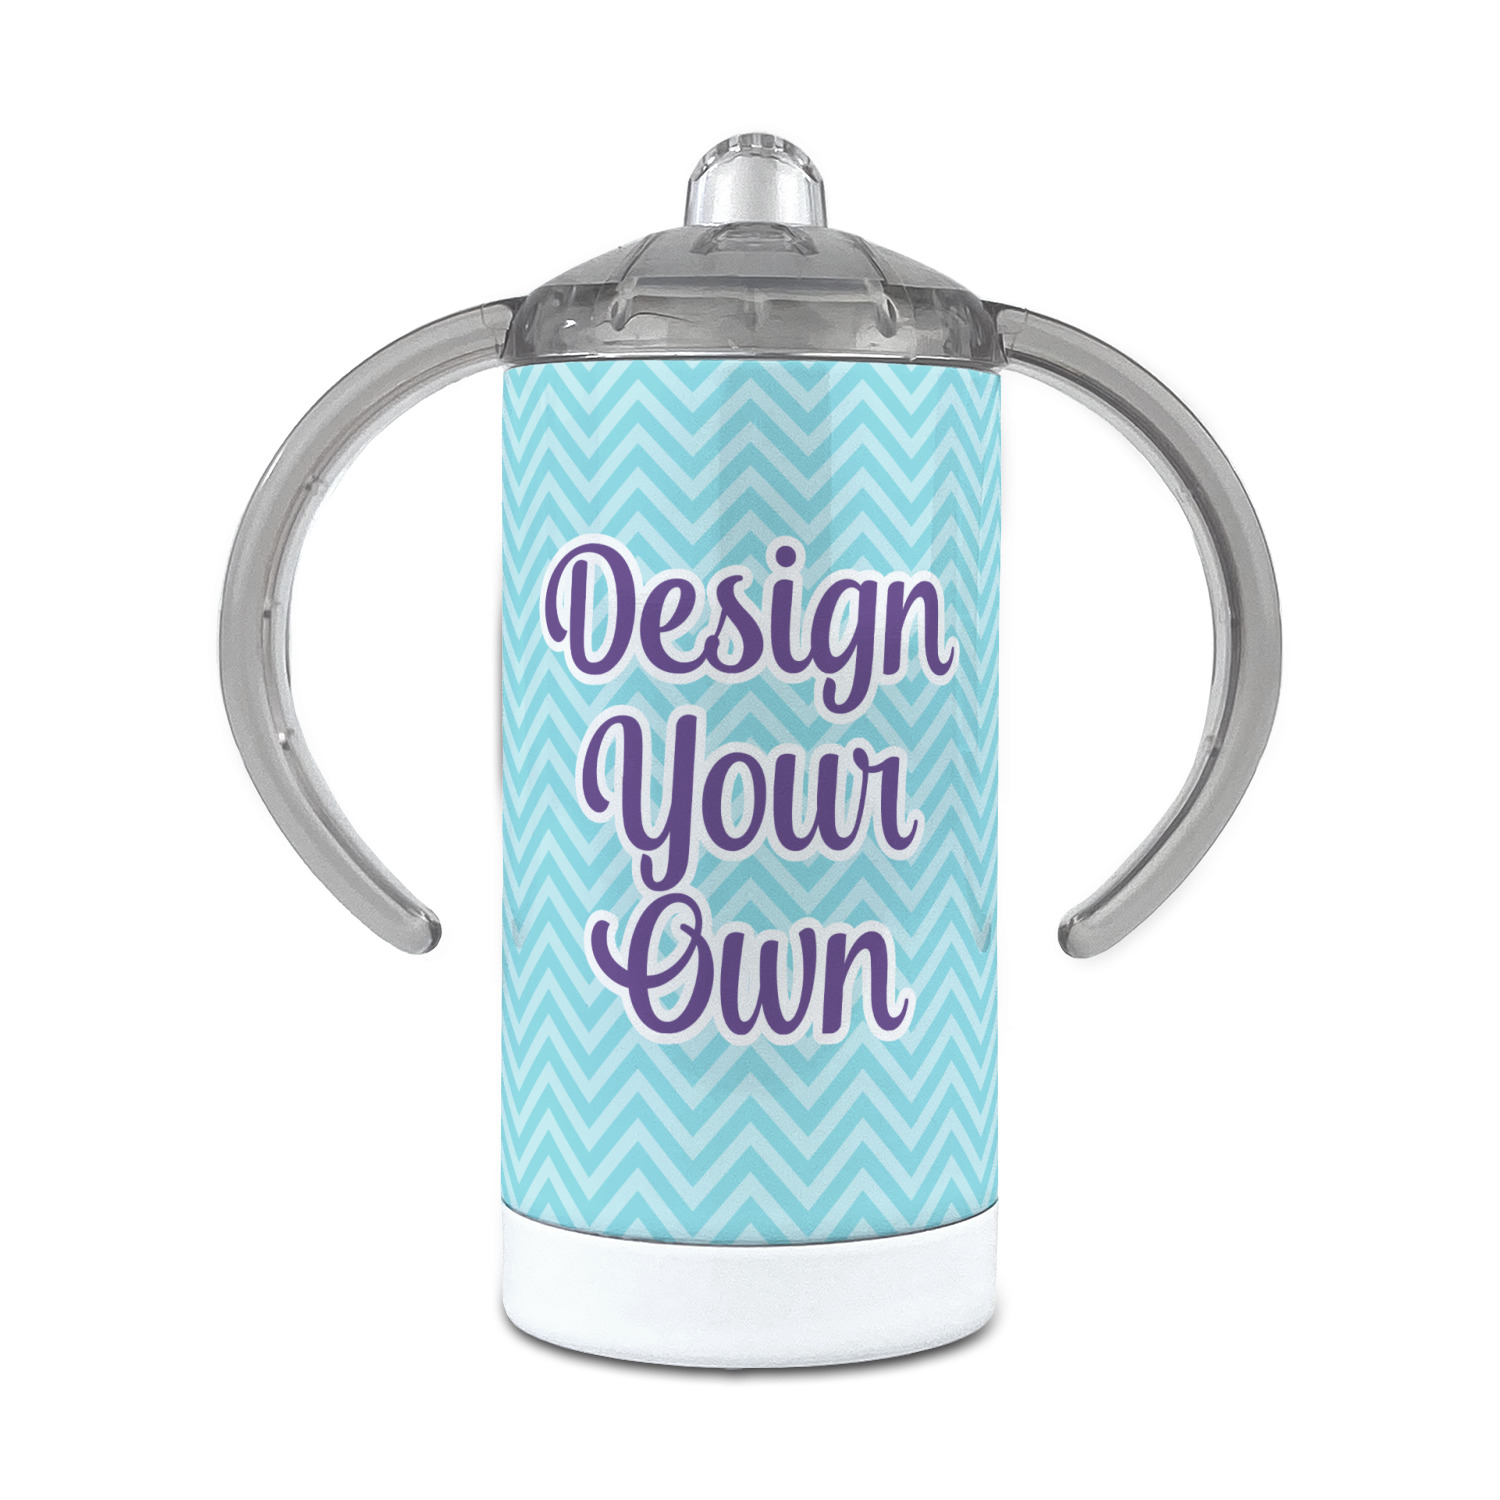 https://www.youcustomizeit.com/common/MAKE/965833/Design-Your-Own-12-oz-Stainless-Steel-Sippy-Cups-FRONT.jpg?lm=1671171250